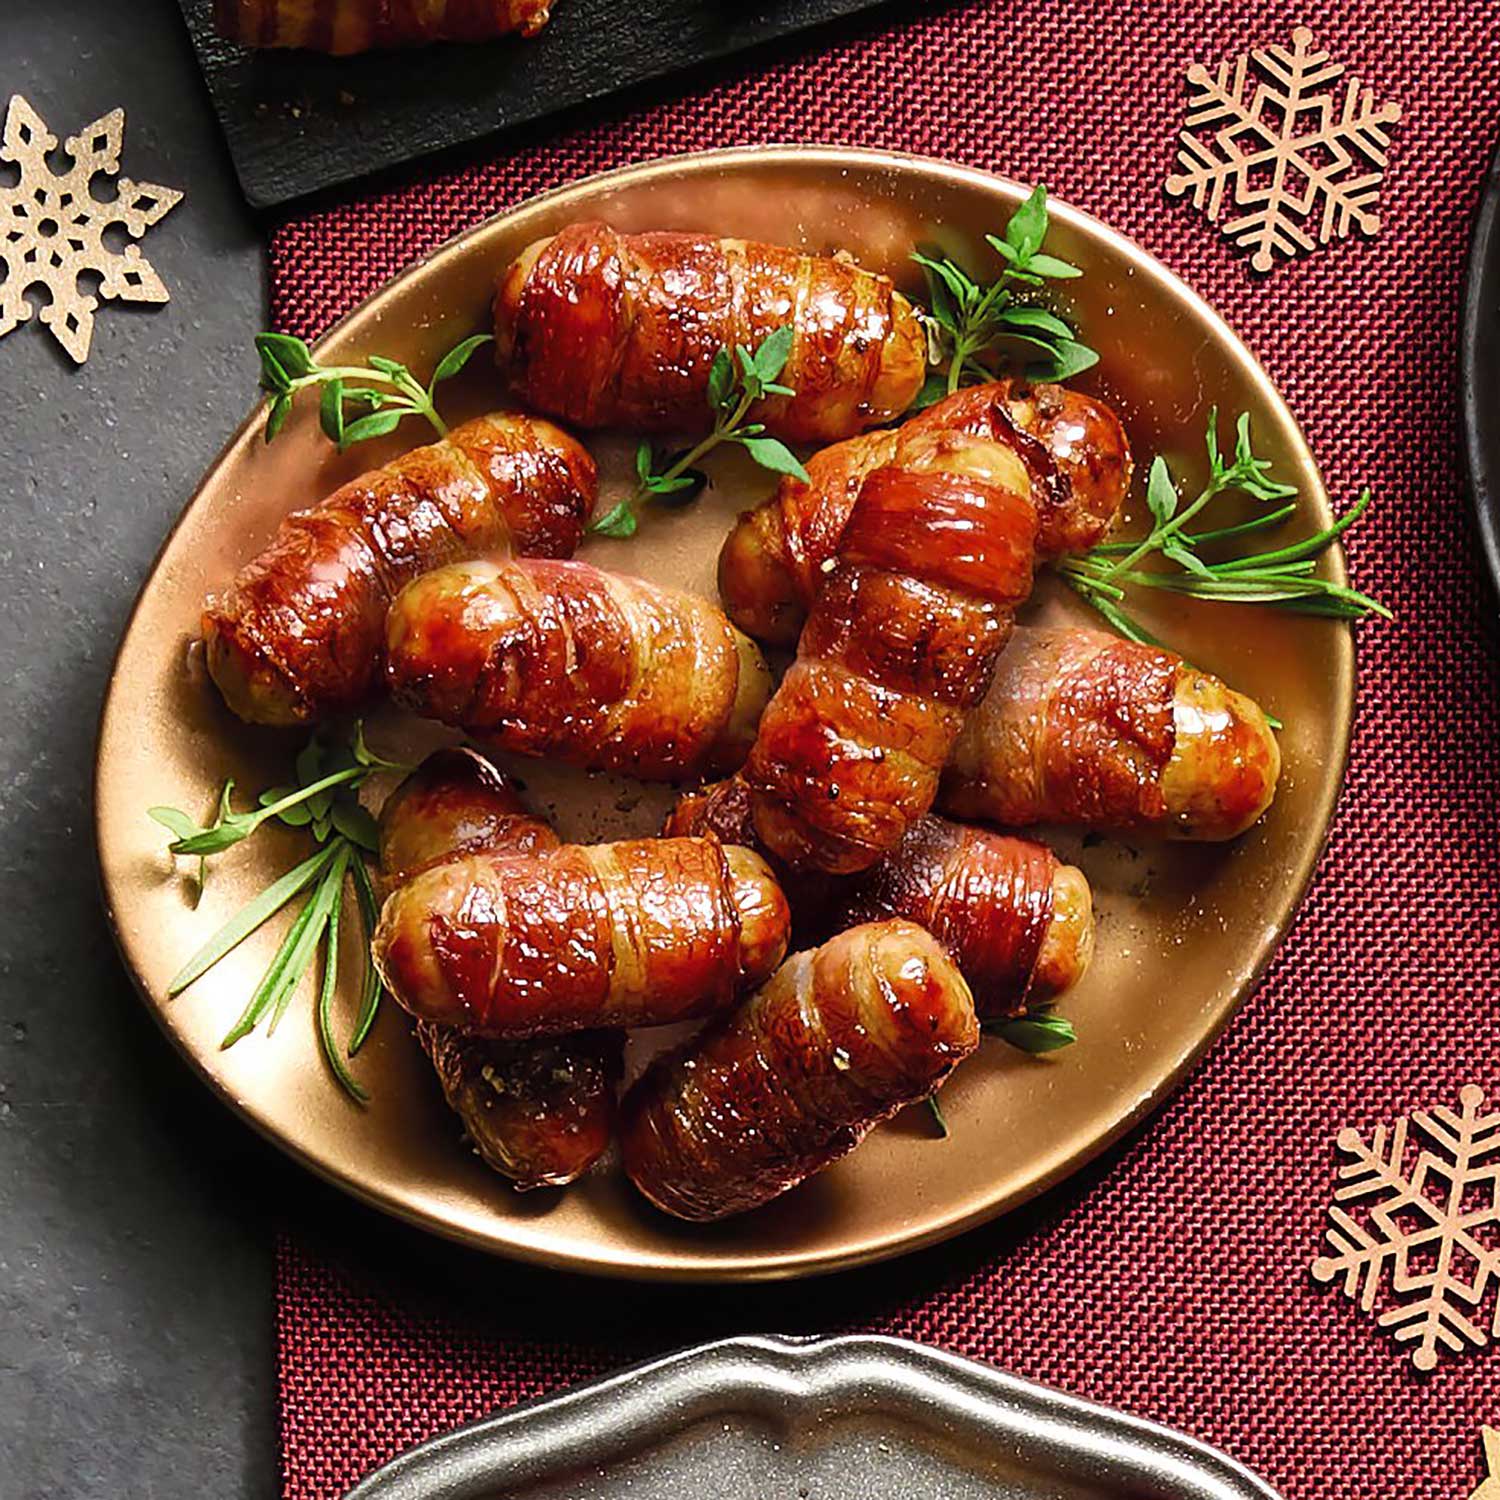 Pigs In A Blanket Aldi - Why Do People Like Them?